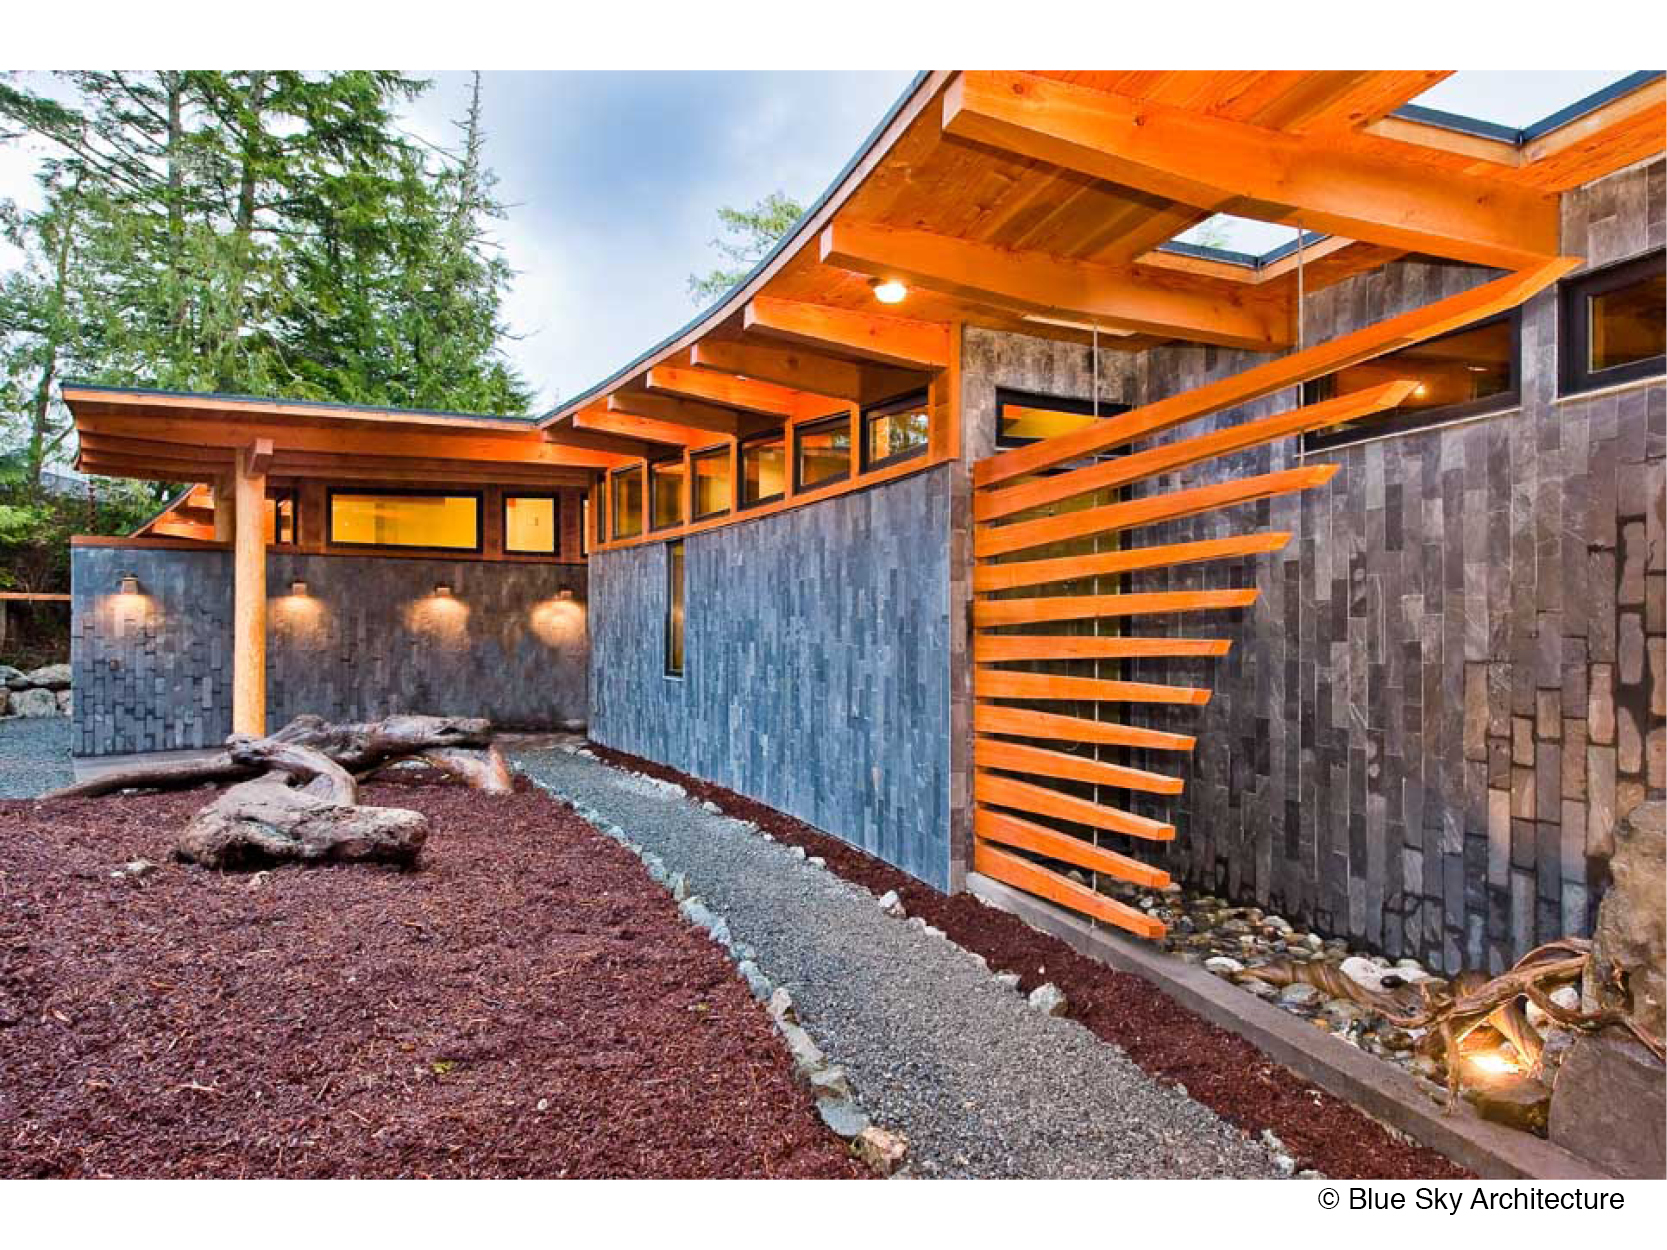 Exterior of a West Coast Modern, forest residence